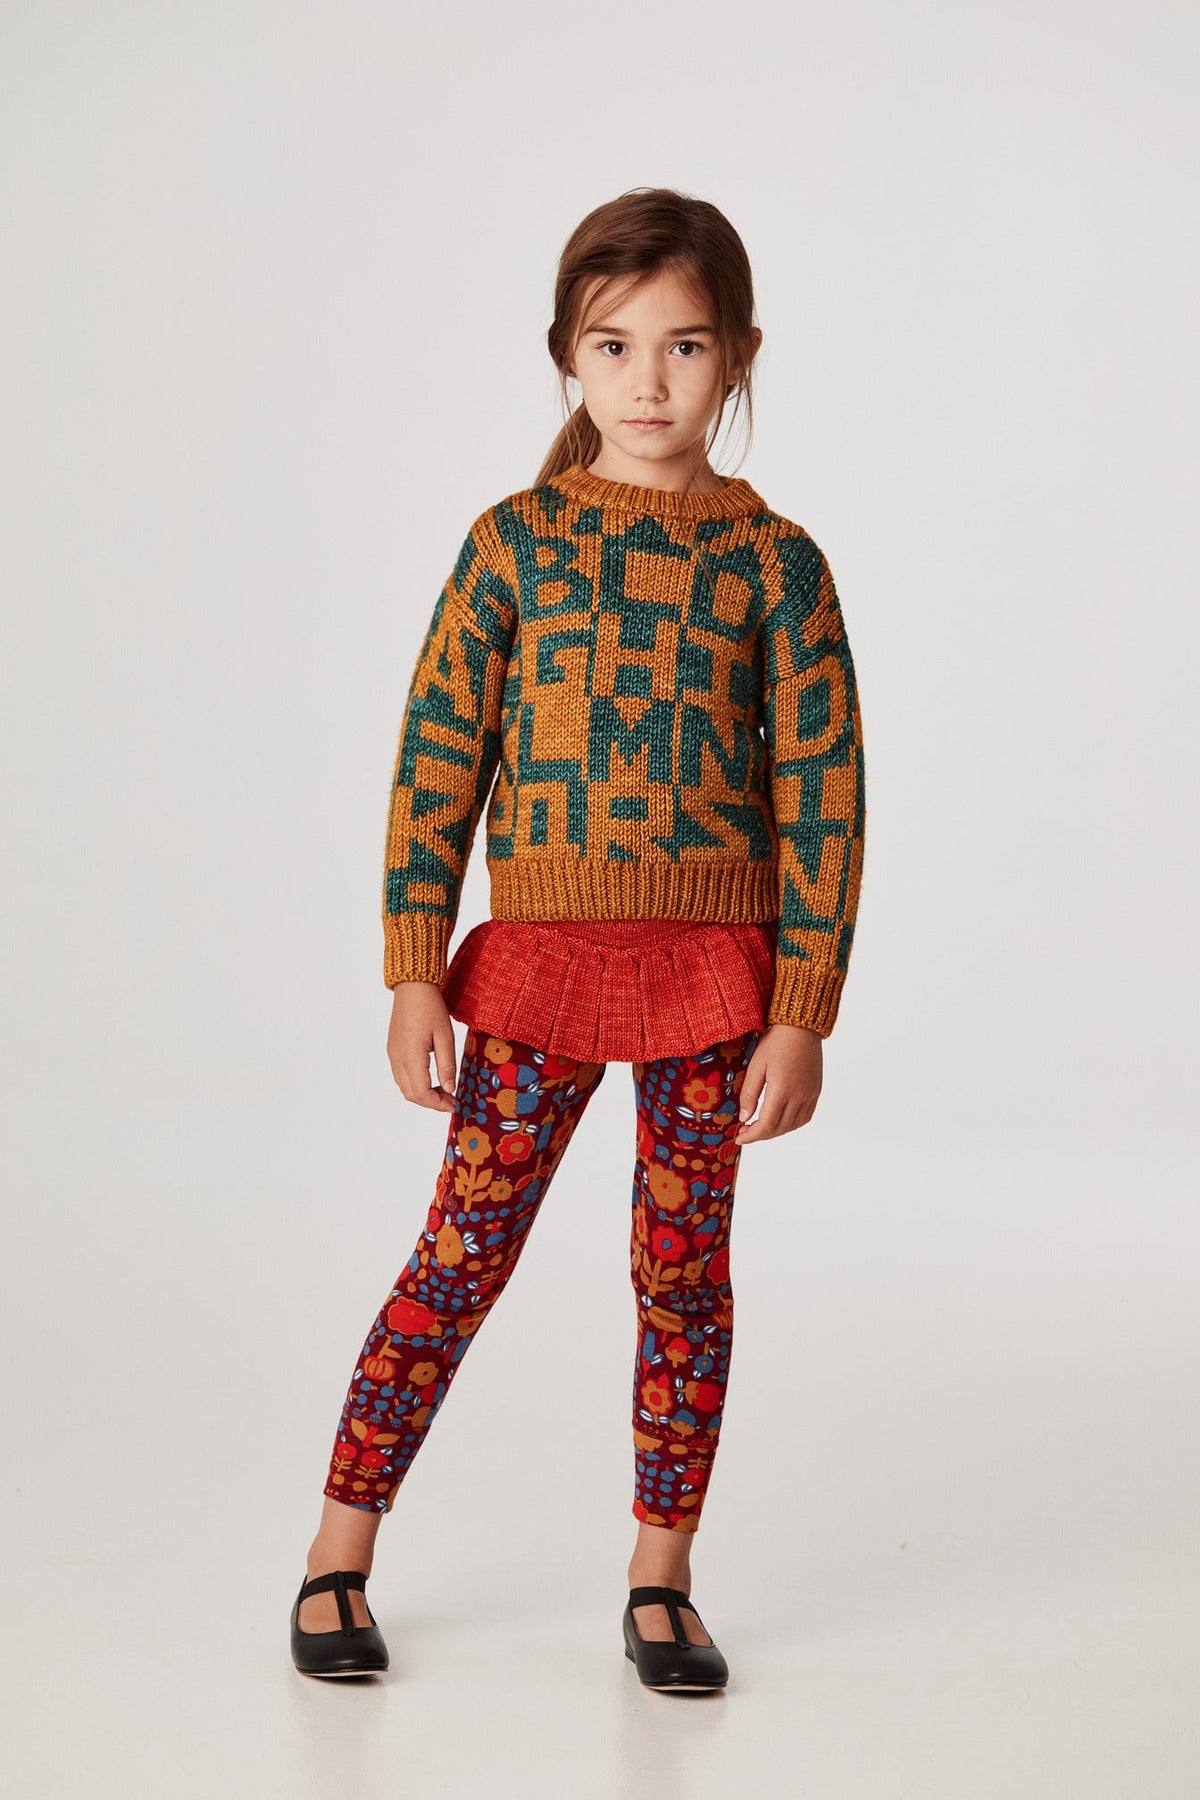 Alphabet Intarsia Sweater - Marigold+Model is 48 inches tall, 44lbs, wearing a size 4-5y